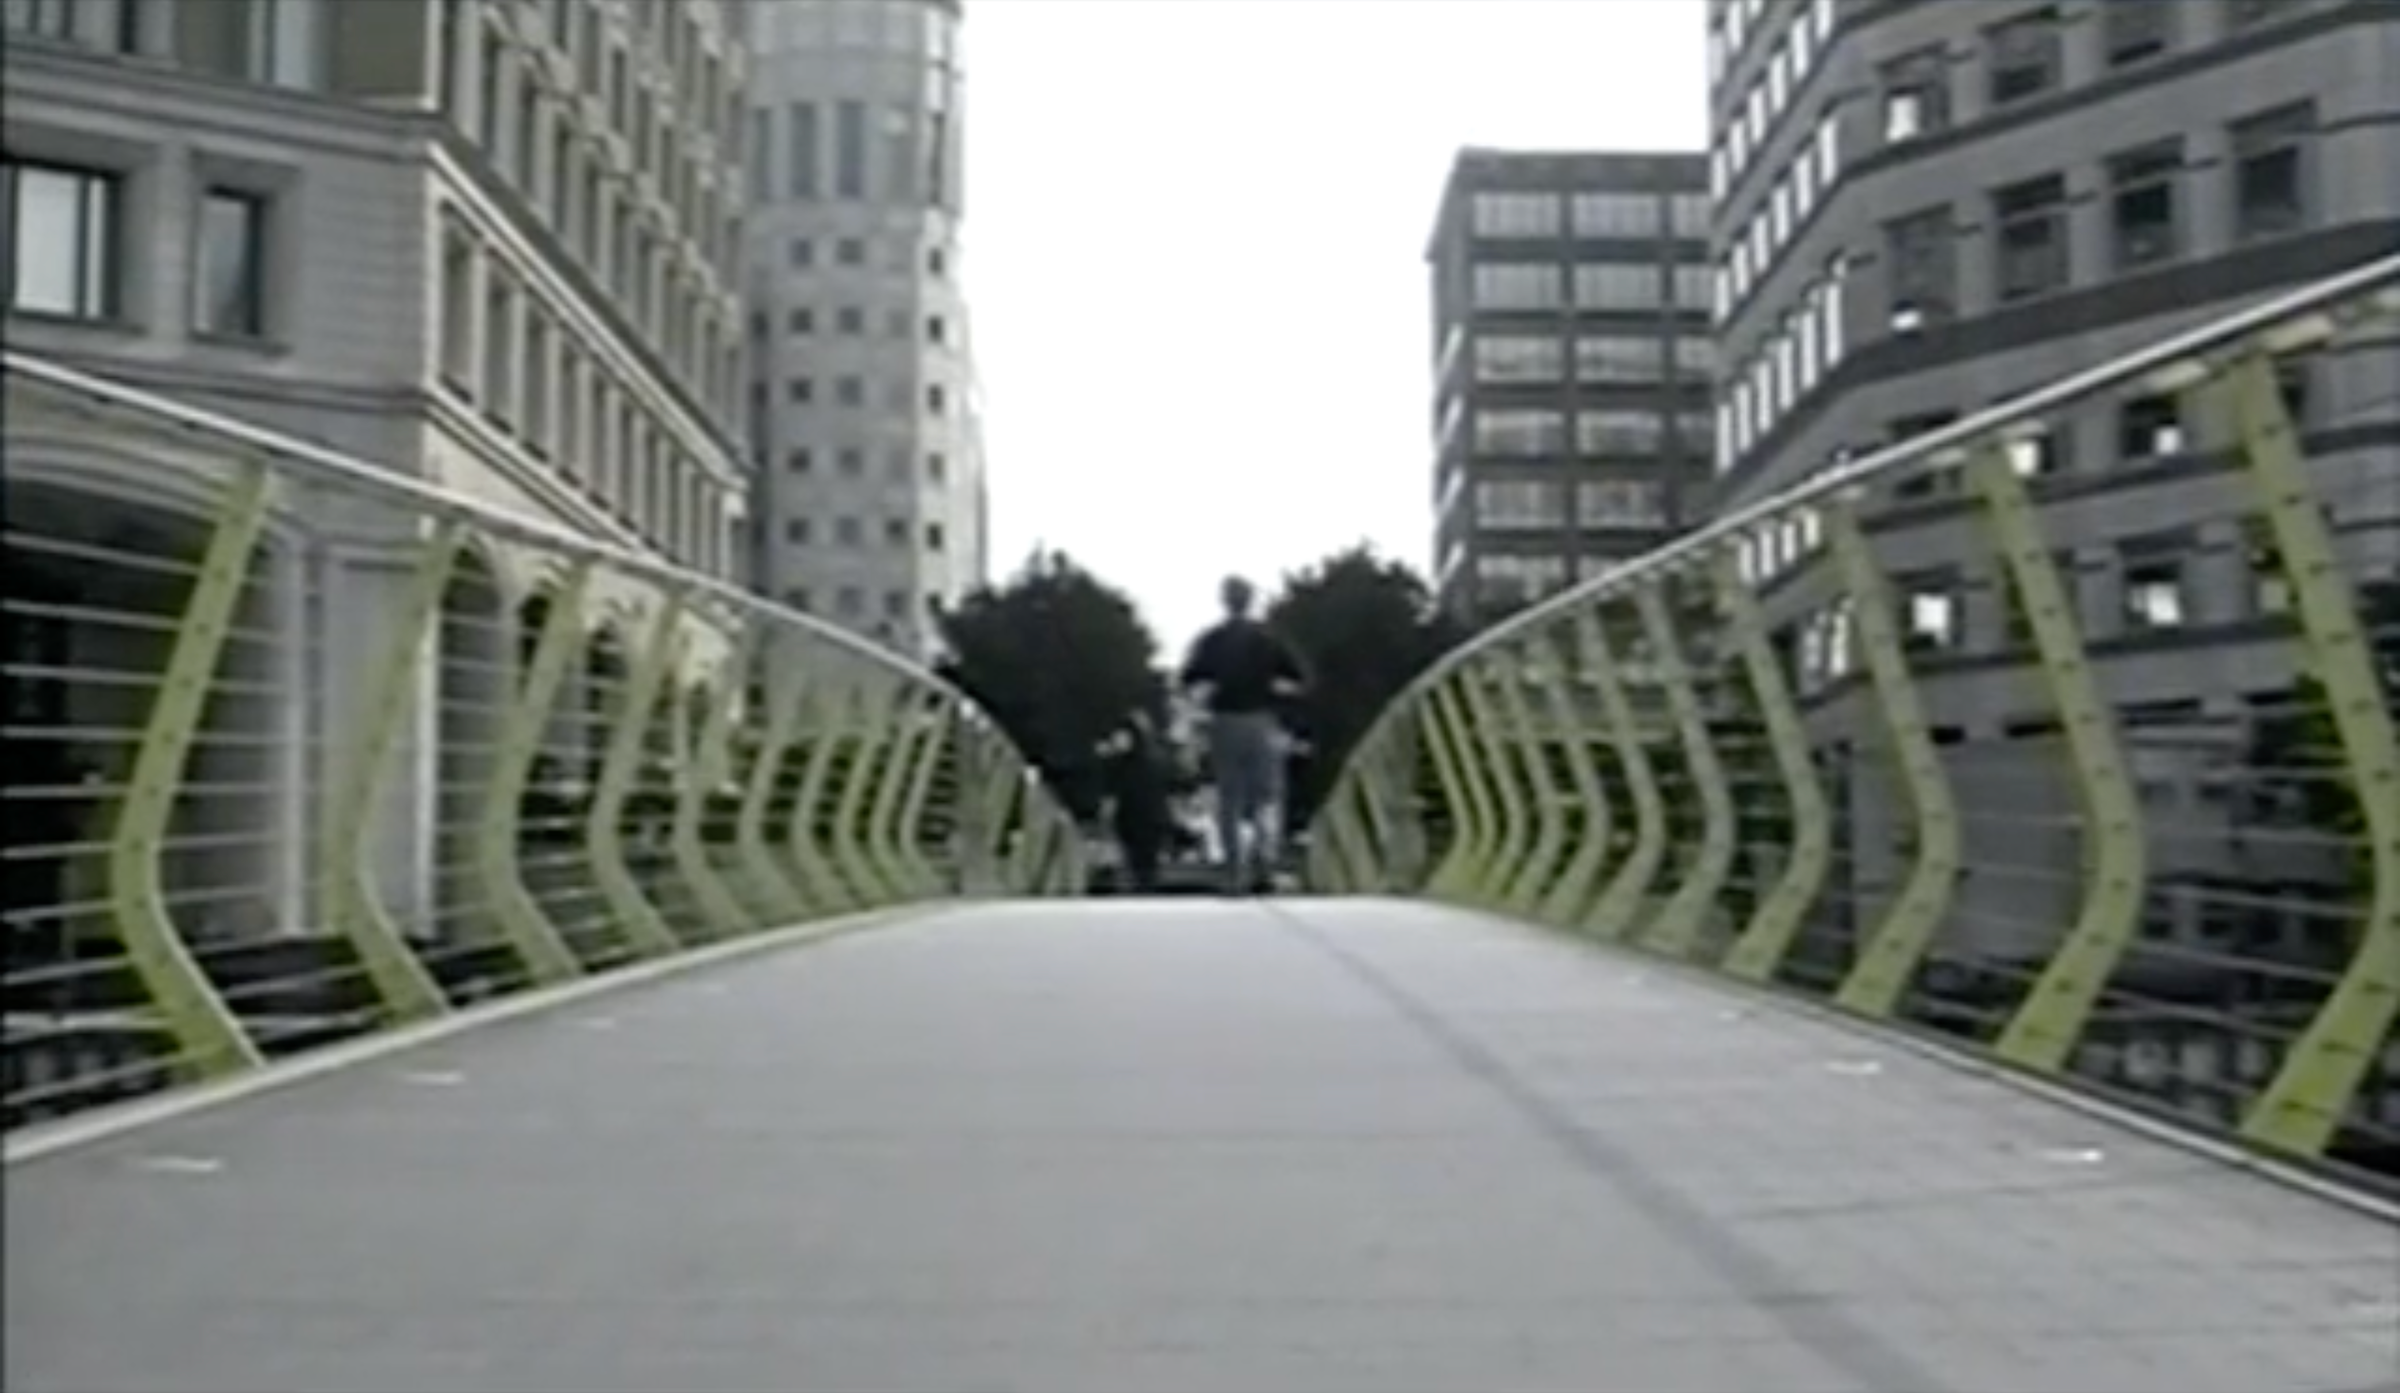 Image taken on a bridge looking across it with a figure running away from the camera and with buildings in the background